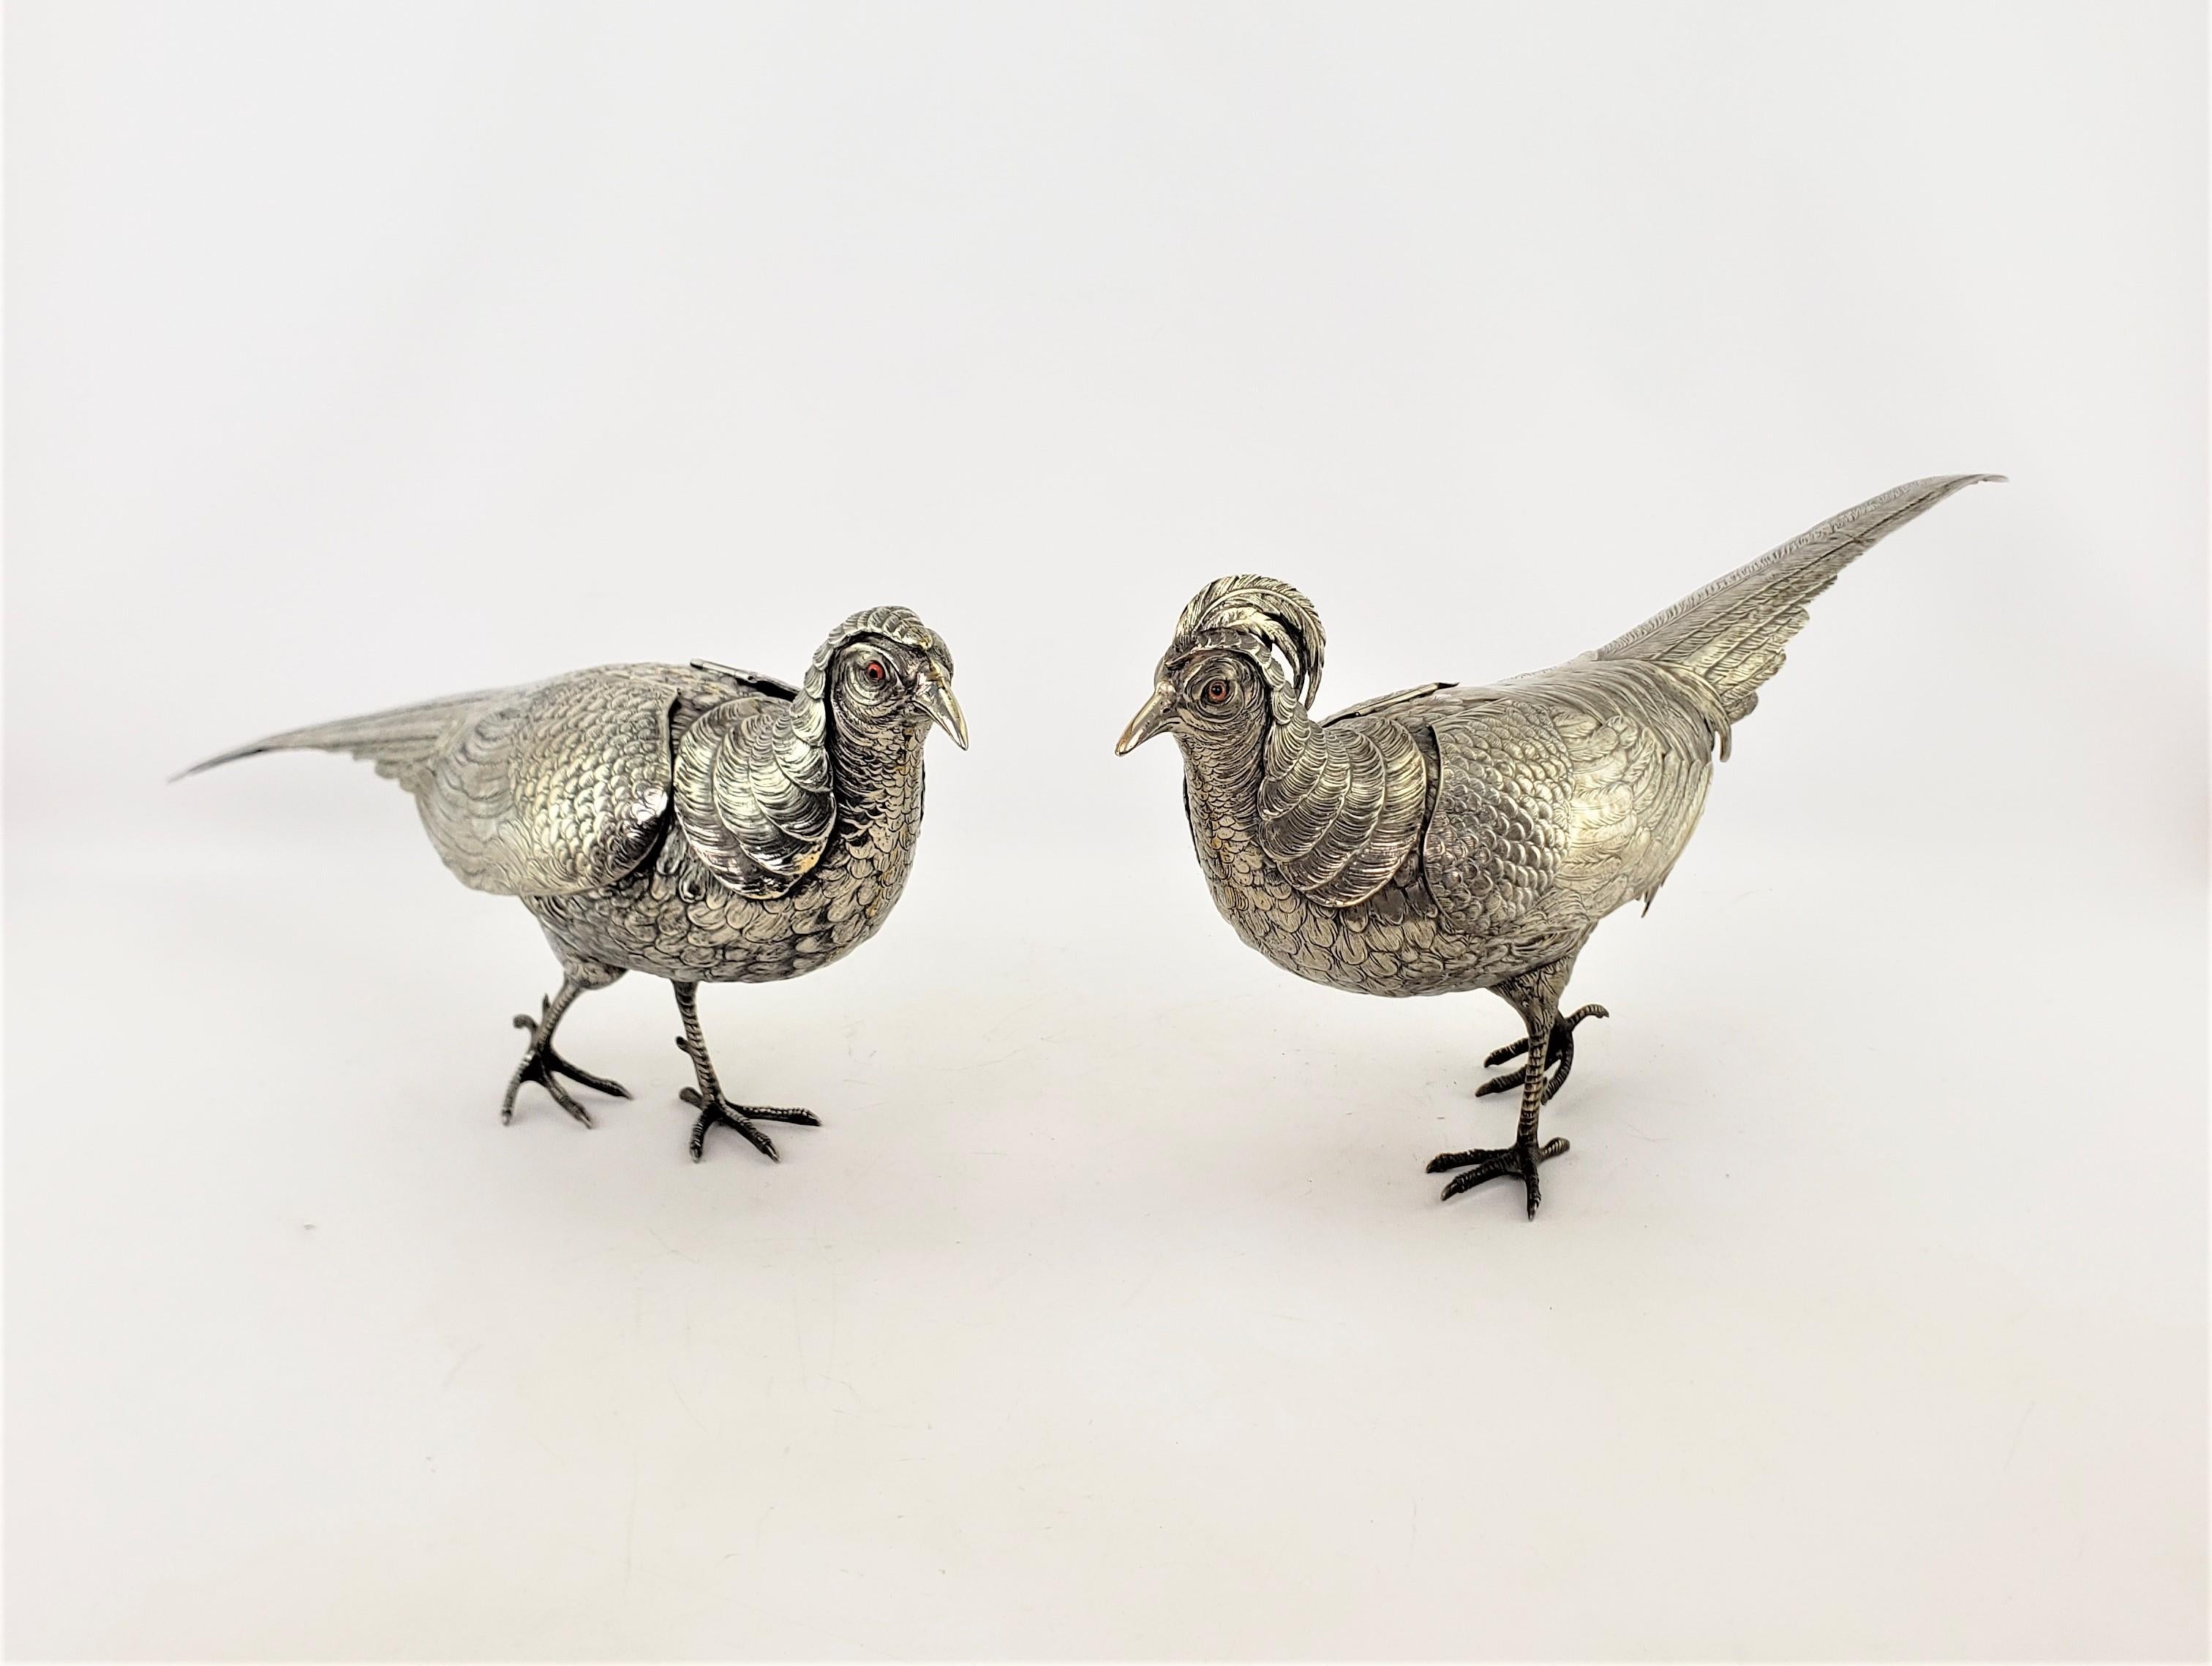 This pair of large antique exotic bird or pheasant sculptures were done by artist G. Vivaldi of Italy in approximately 1920 in a Victorian style. The sculptures are composed of silver plate over copper and depict a pair of detailed walking pheasants